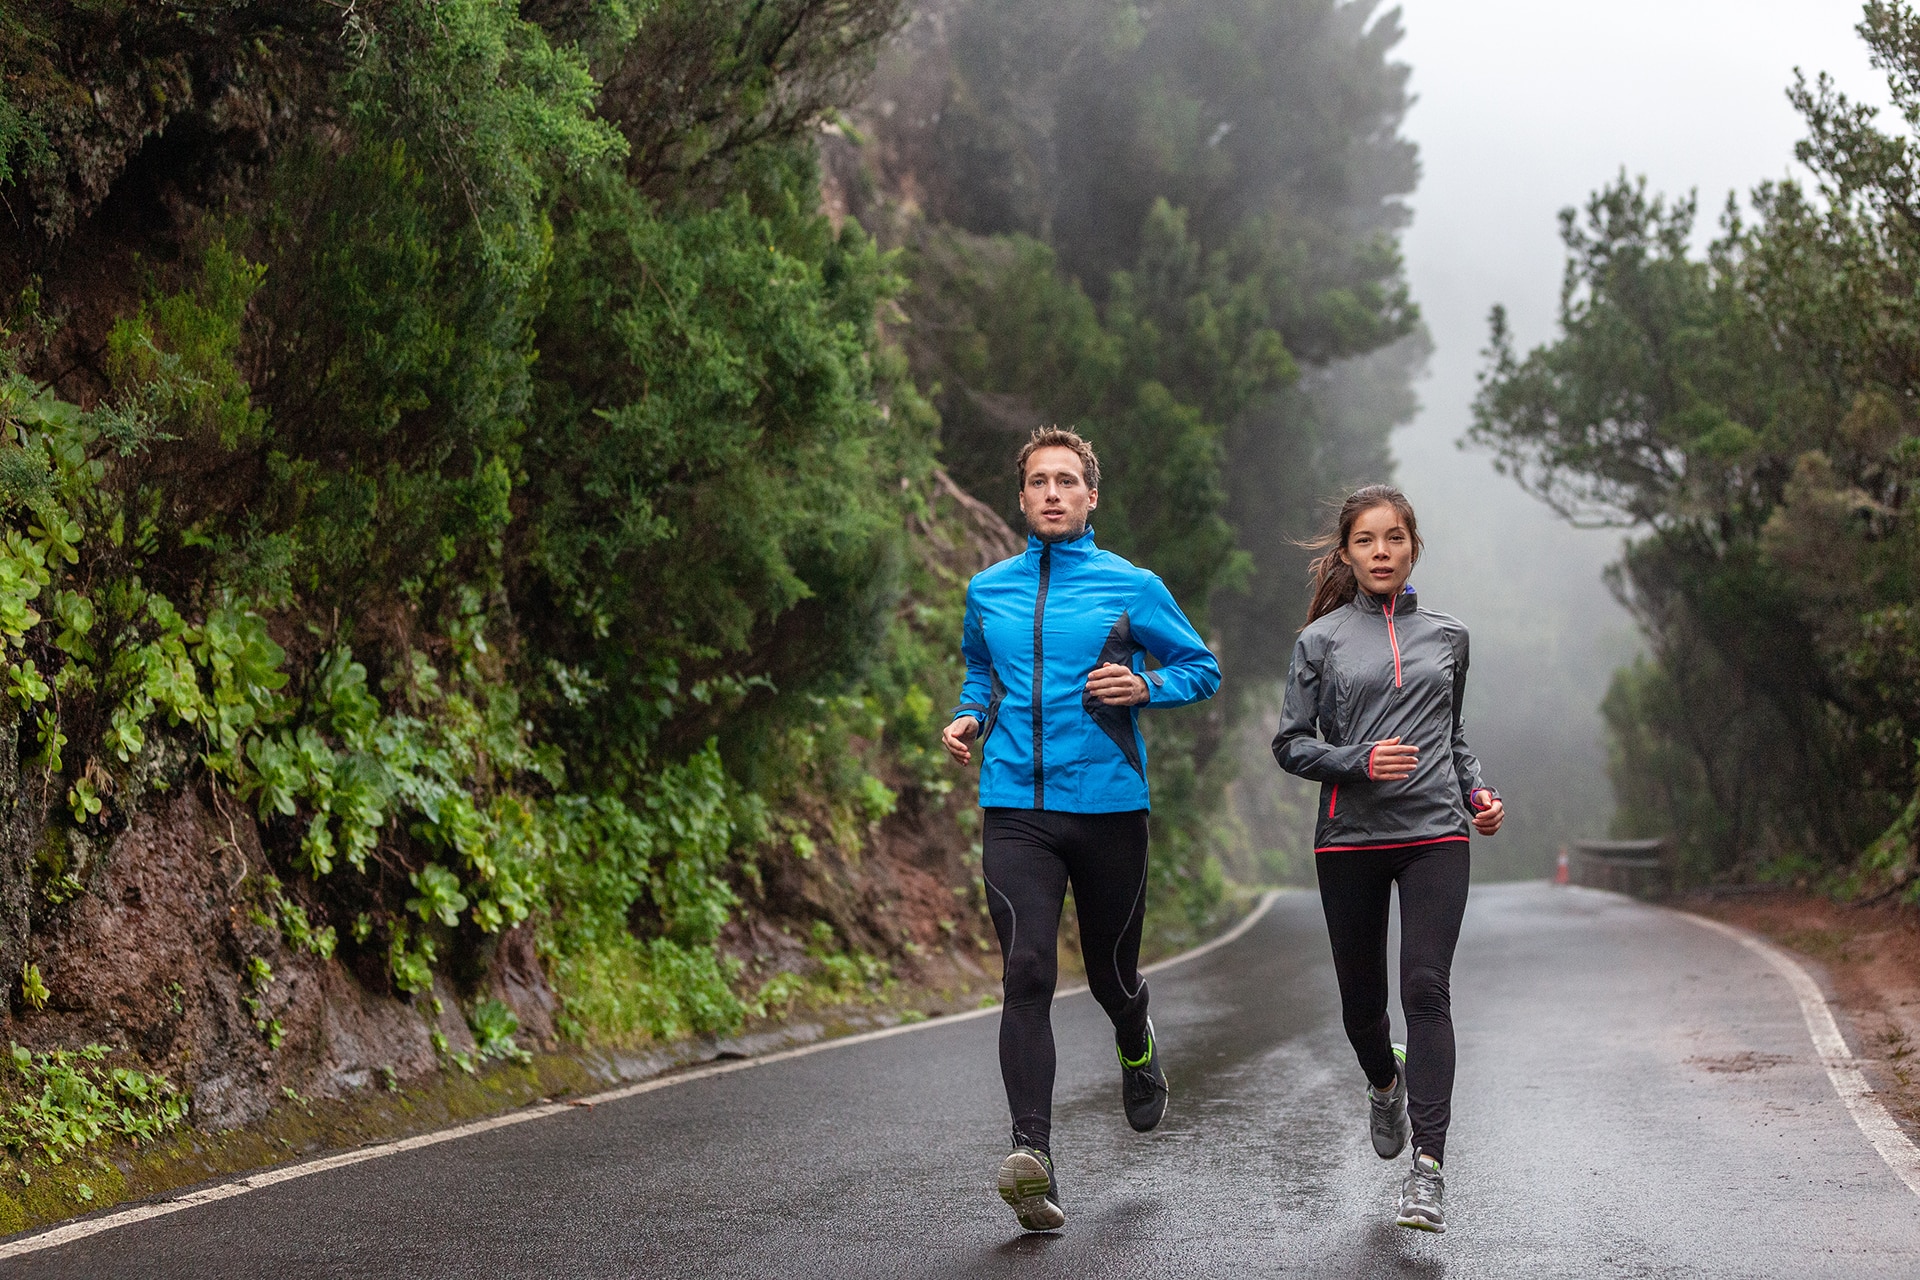 Rain run fit people training jogging in rain weather wearing cold clothing running outdoors in nature autumn season. Active couple on wet park trail jogging. Asian woman, Caucasian man athletes.